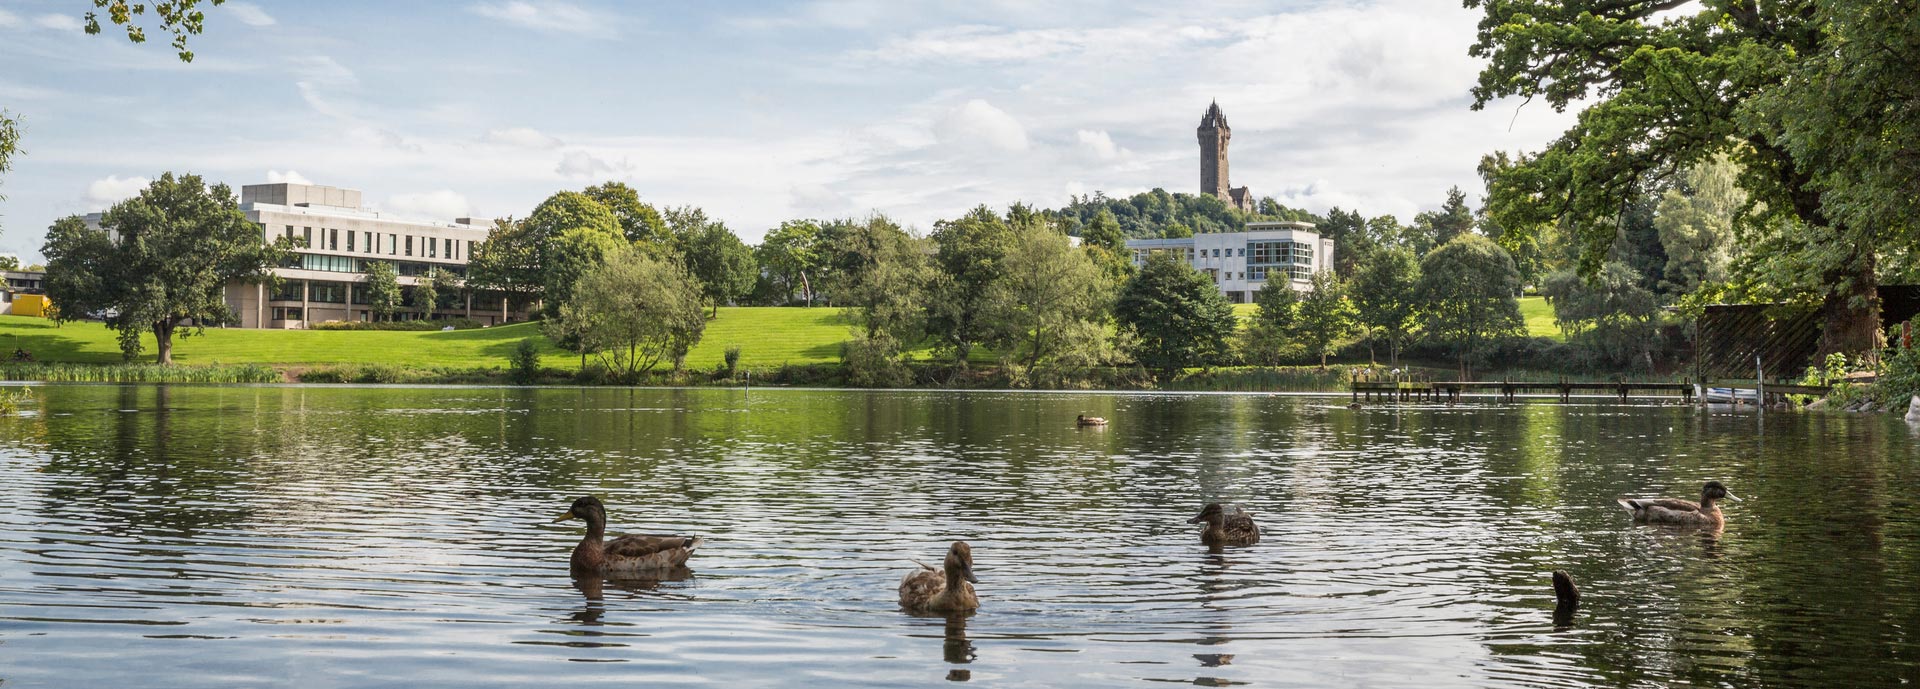 Ducks on loch with University of Stirling and Wallace Monument in background